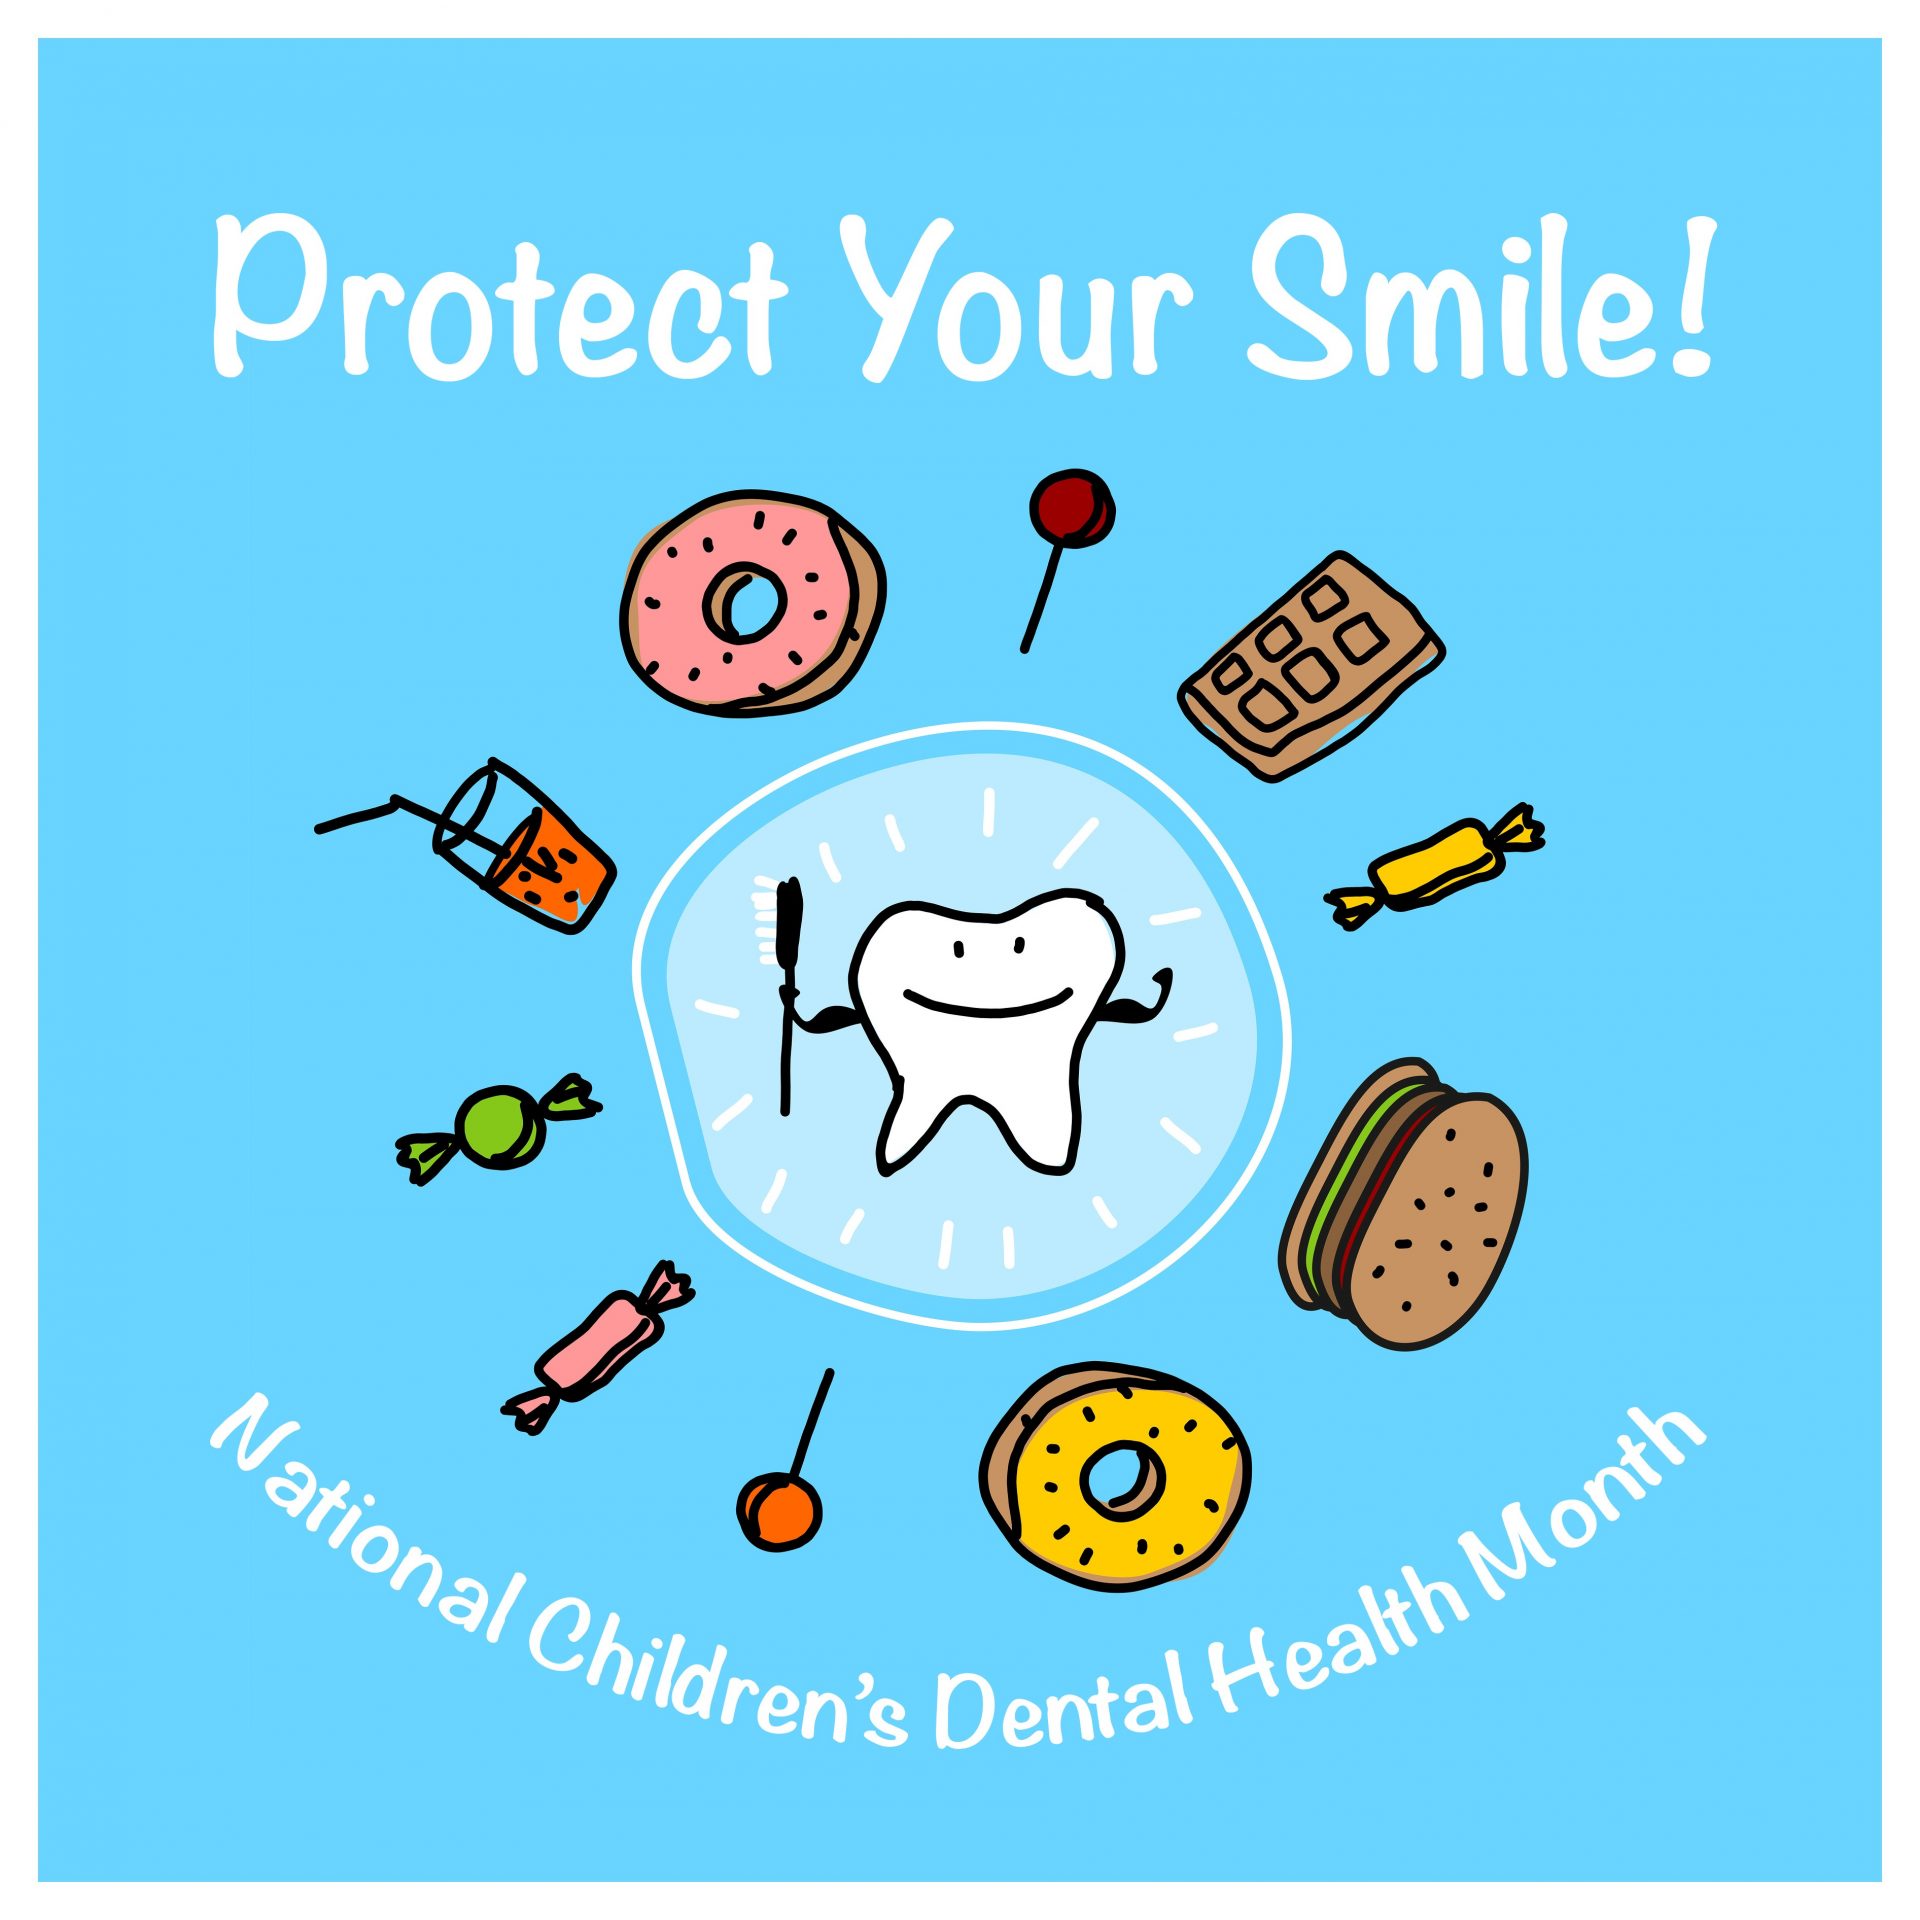 Maintain Dental Health with Essential Care Tips